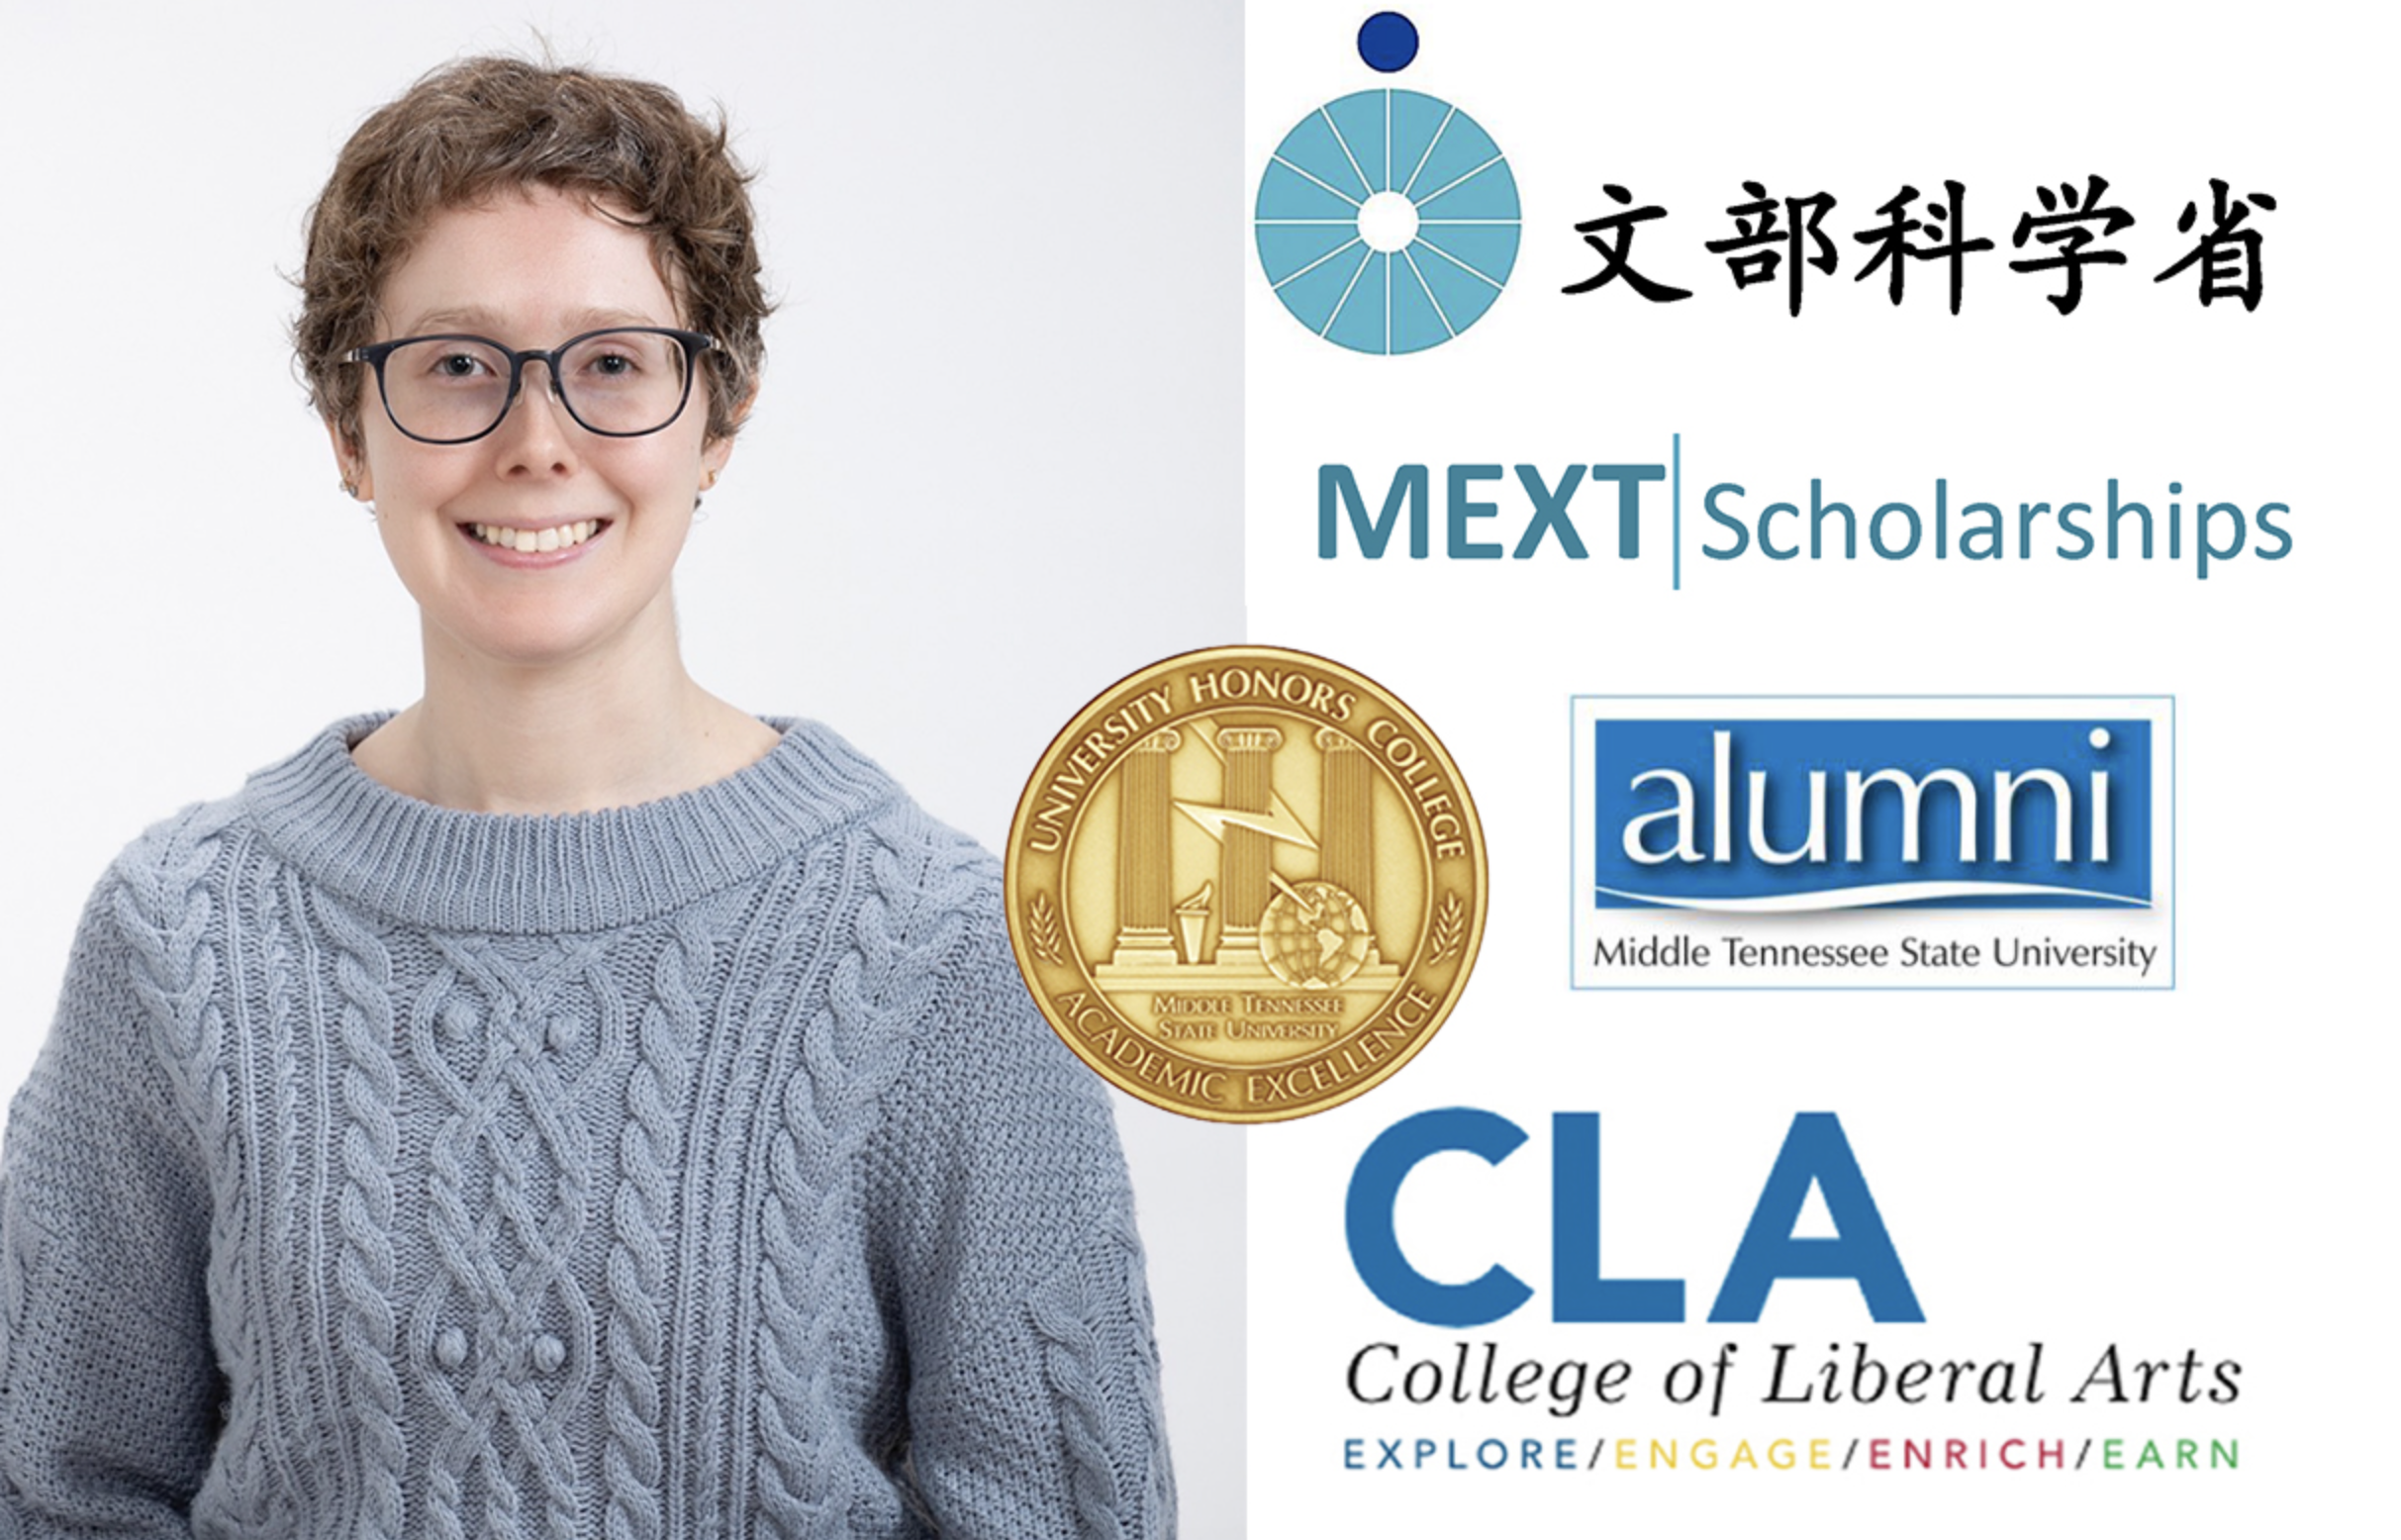 Middle Tennessee State University alumna Rebecca Clippard was recently awarded the exclusive MEXT Research Scholarship to complete a postgraduate degree at a Japanese institution. 